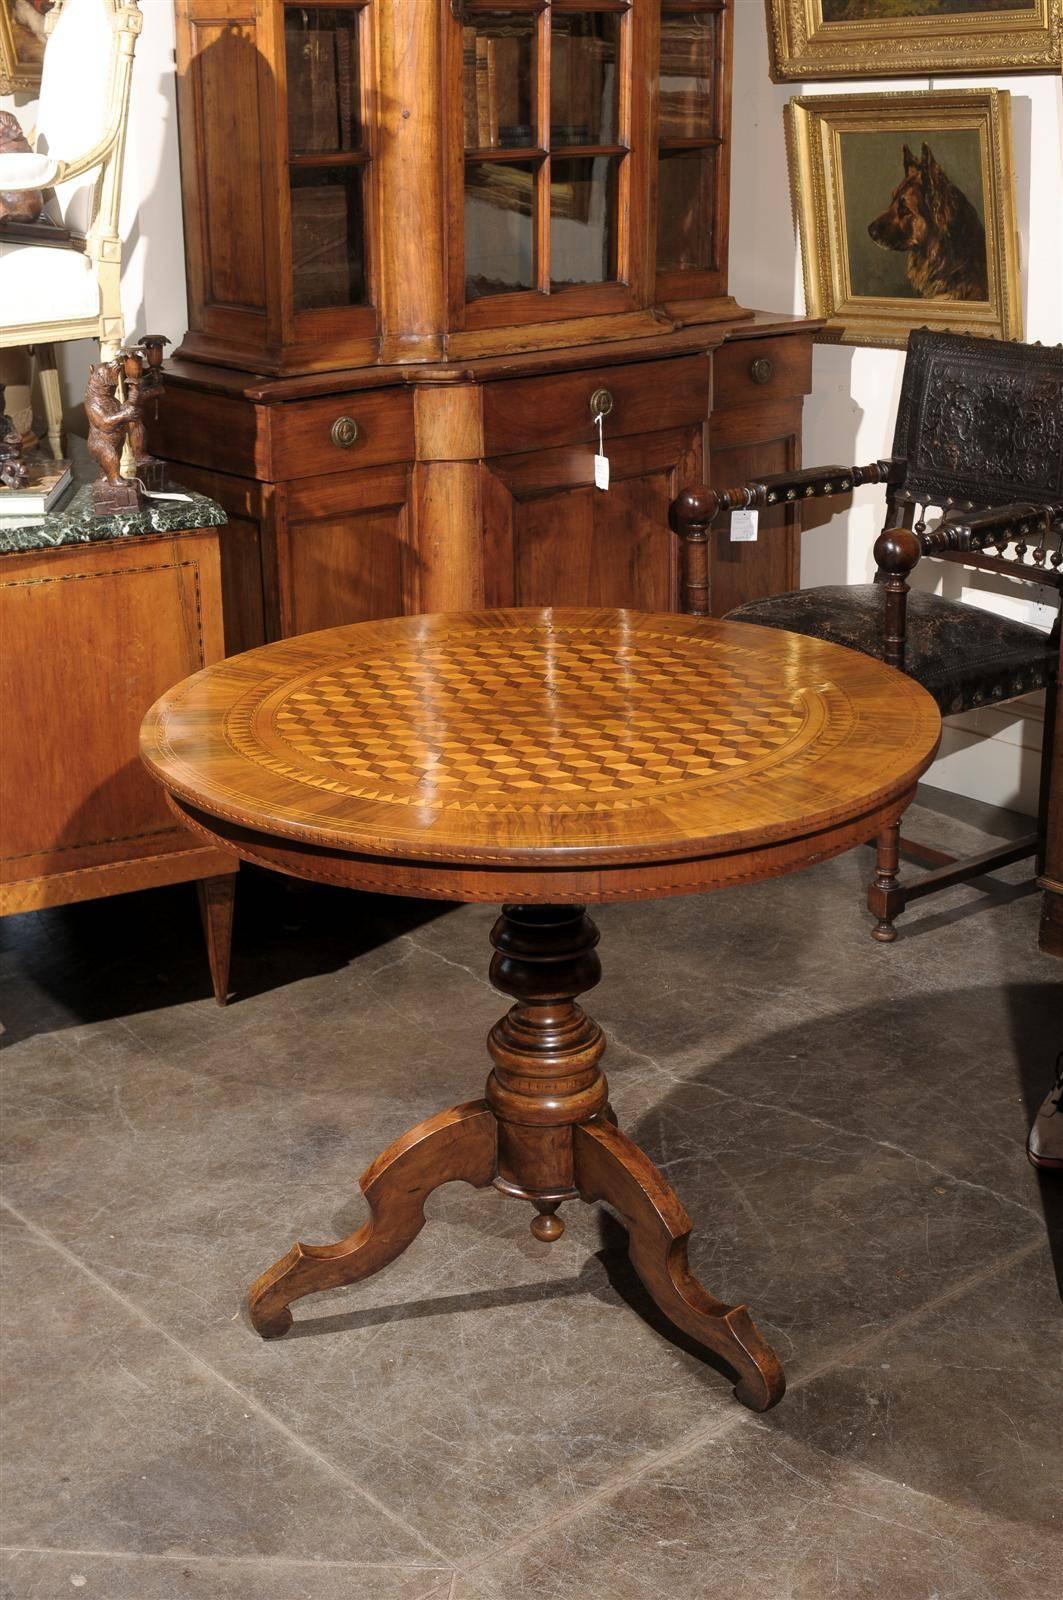 This Italian round pedestal wooden table from the mid to late 19th century features an exquisite cube parquetry inlay on the top, surrounded by a variety of motifs in the surround. The wood grains, delicately placed between the decorative motifs,